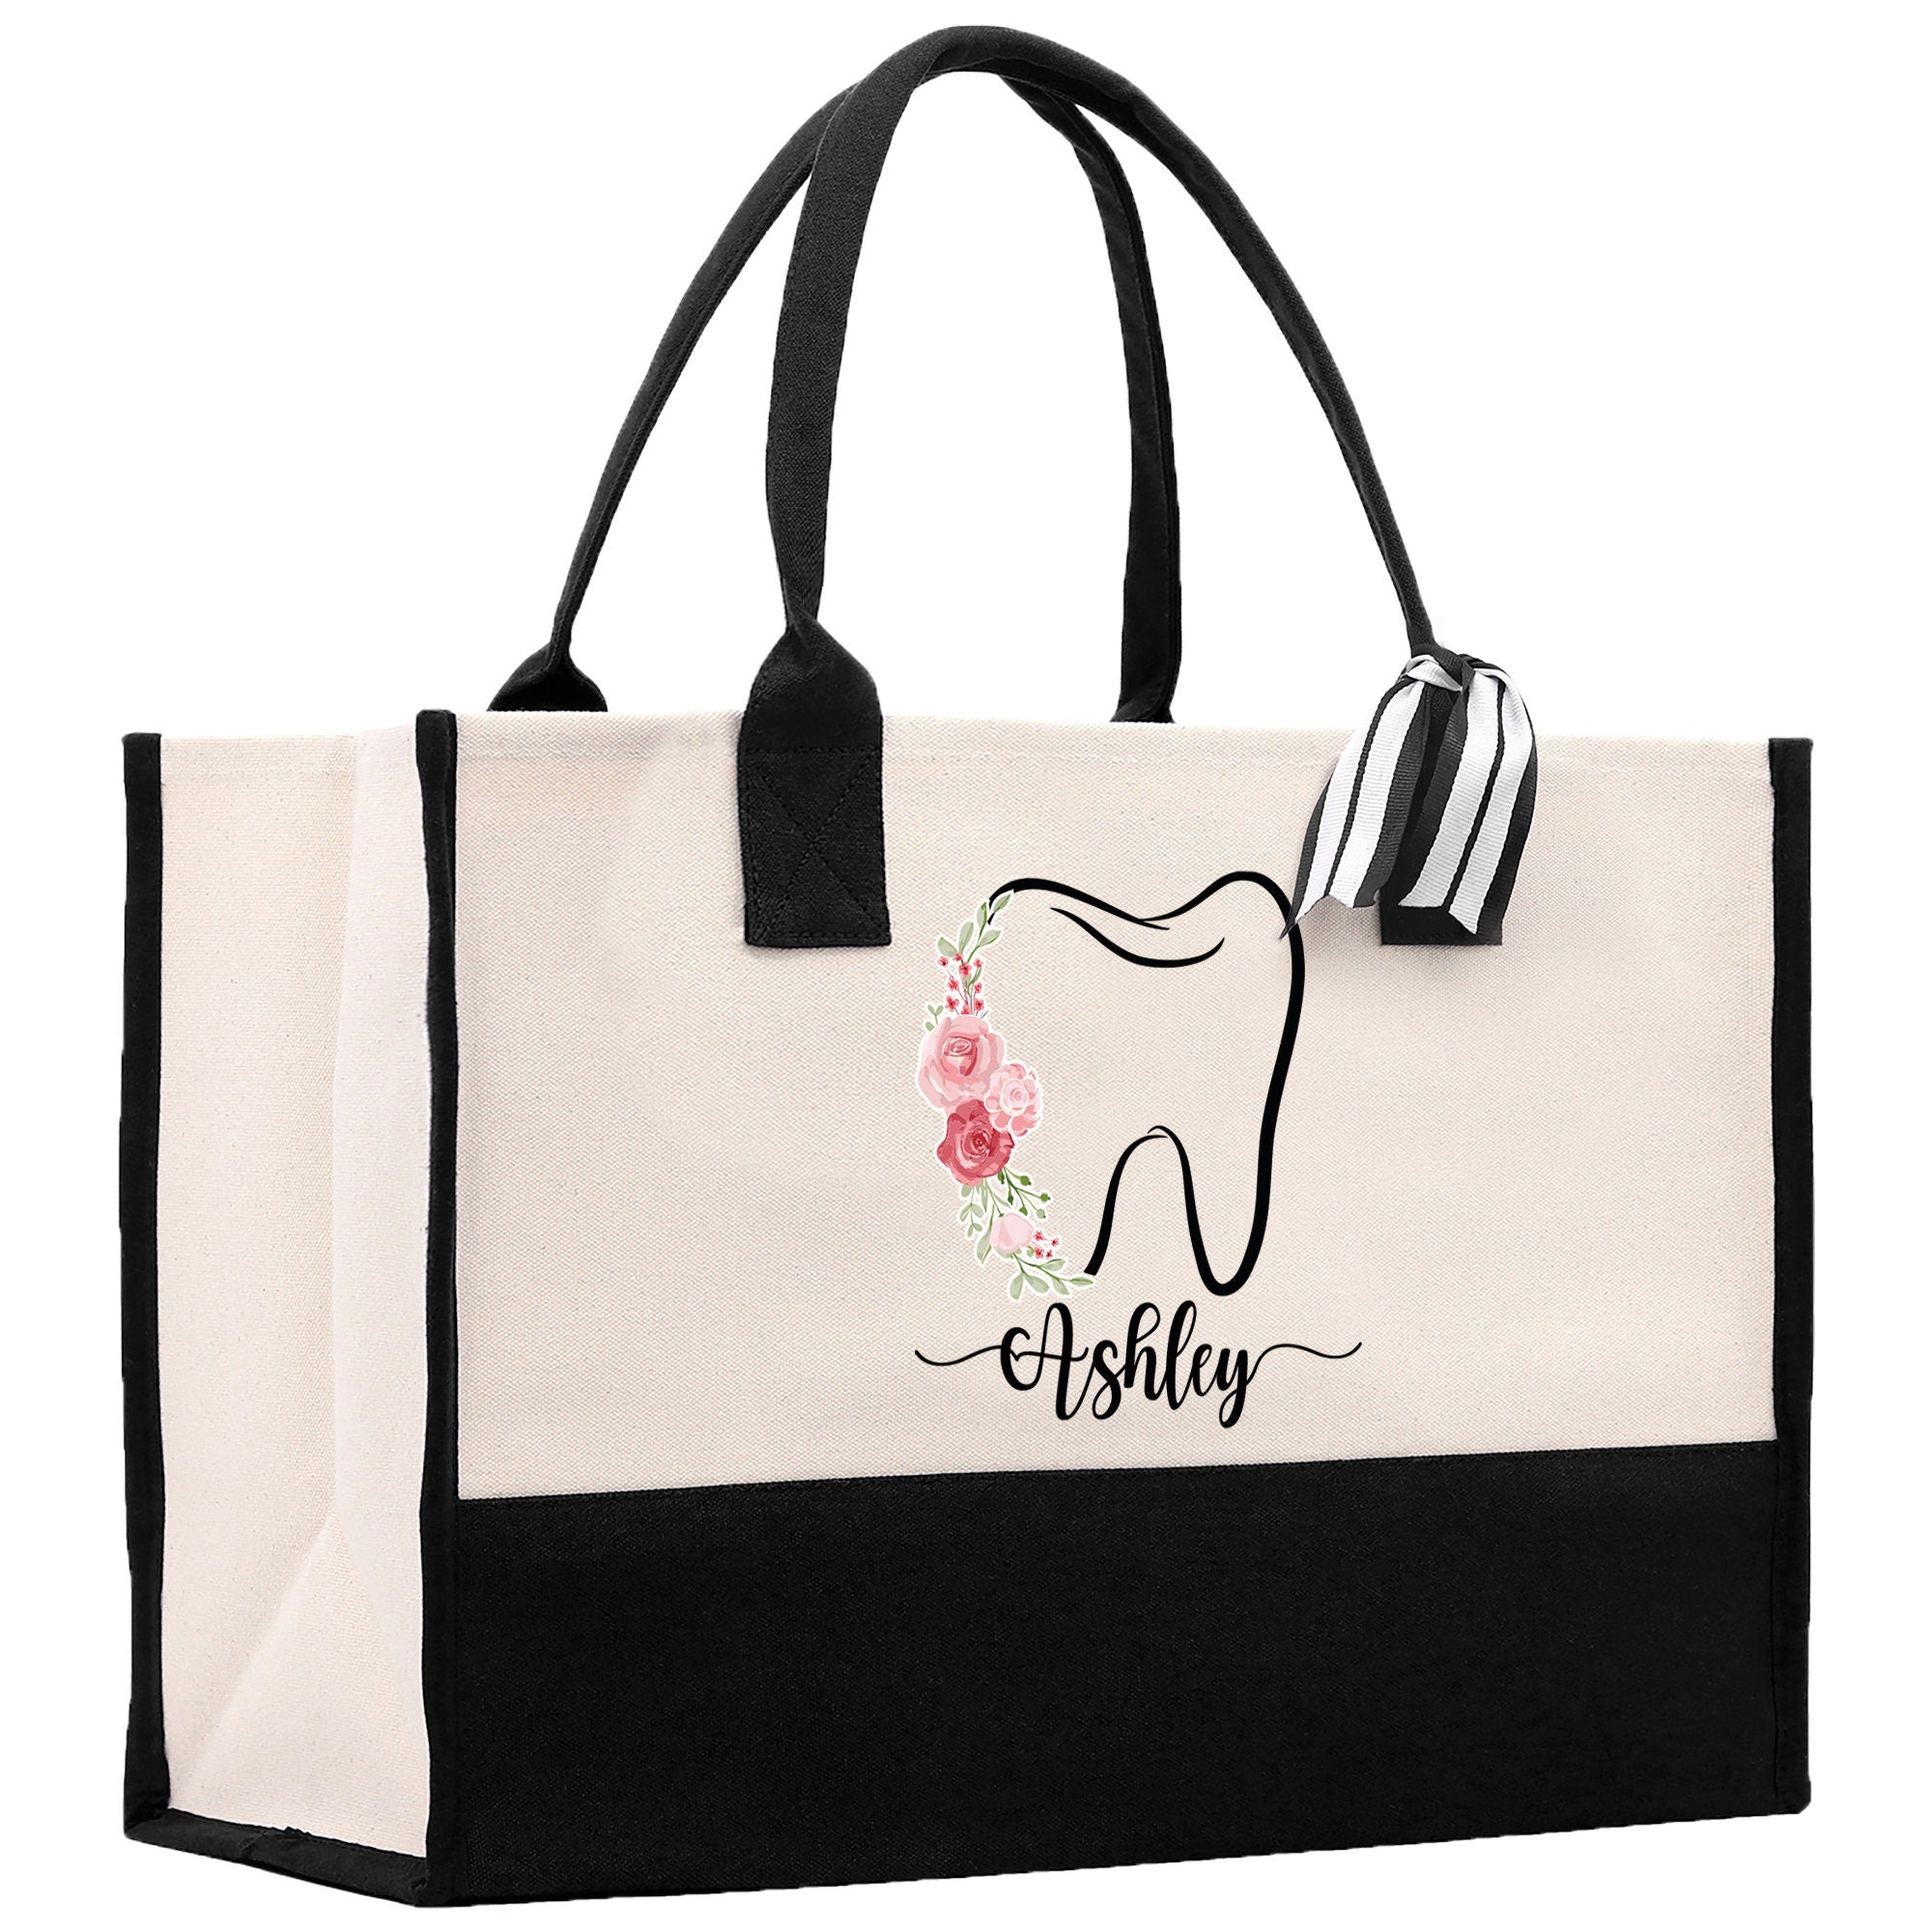 a black and white tote bag with a pink flower on it